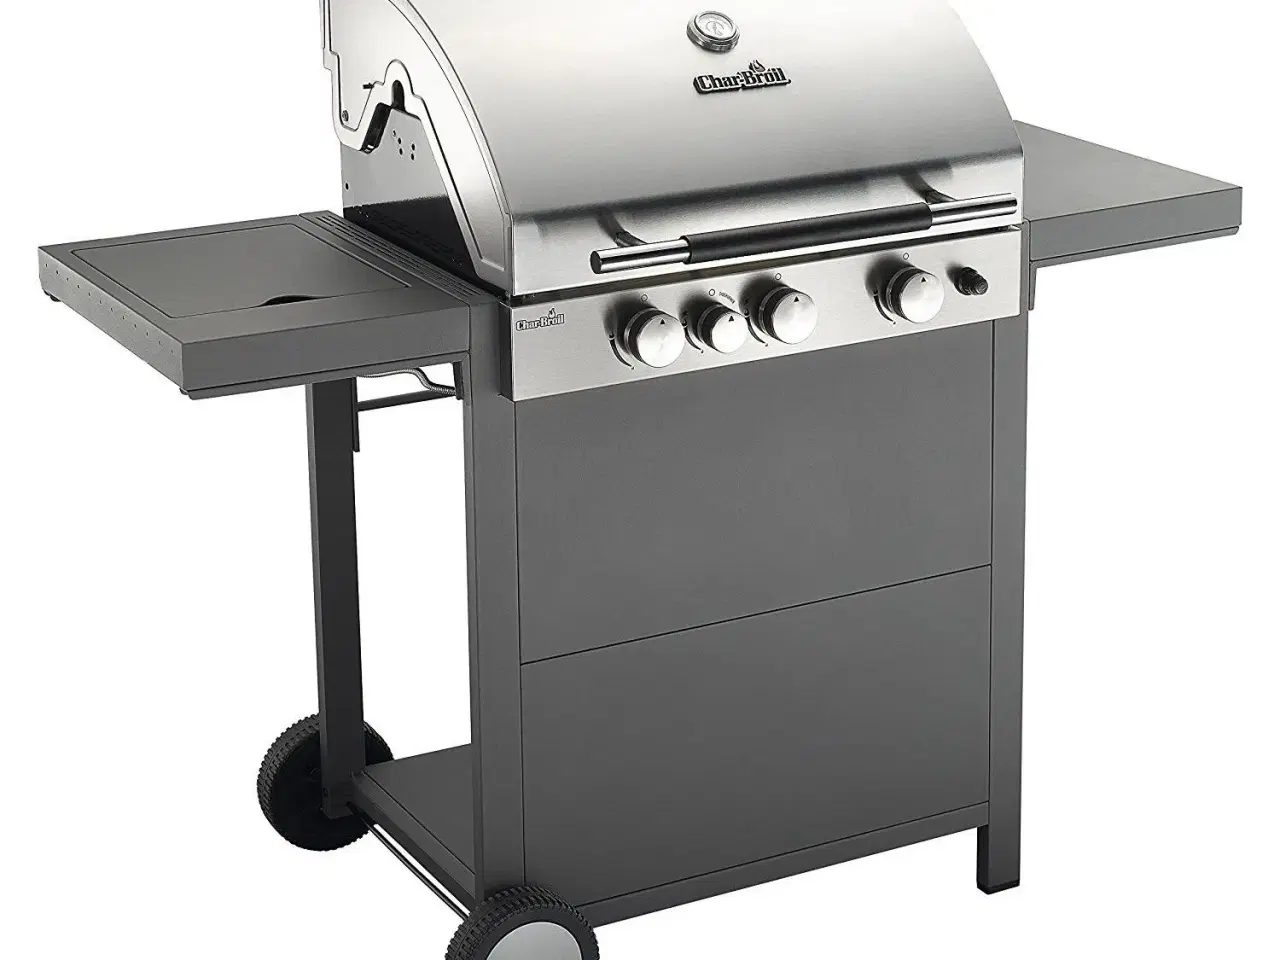 Billede 1 - Char-Broil THERMOS C-34G gasgrill